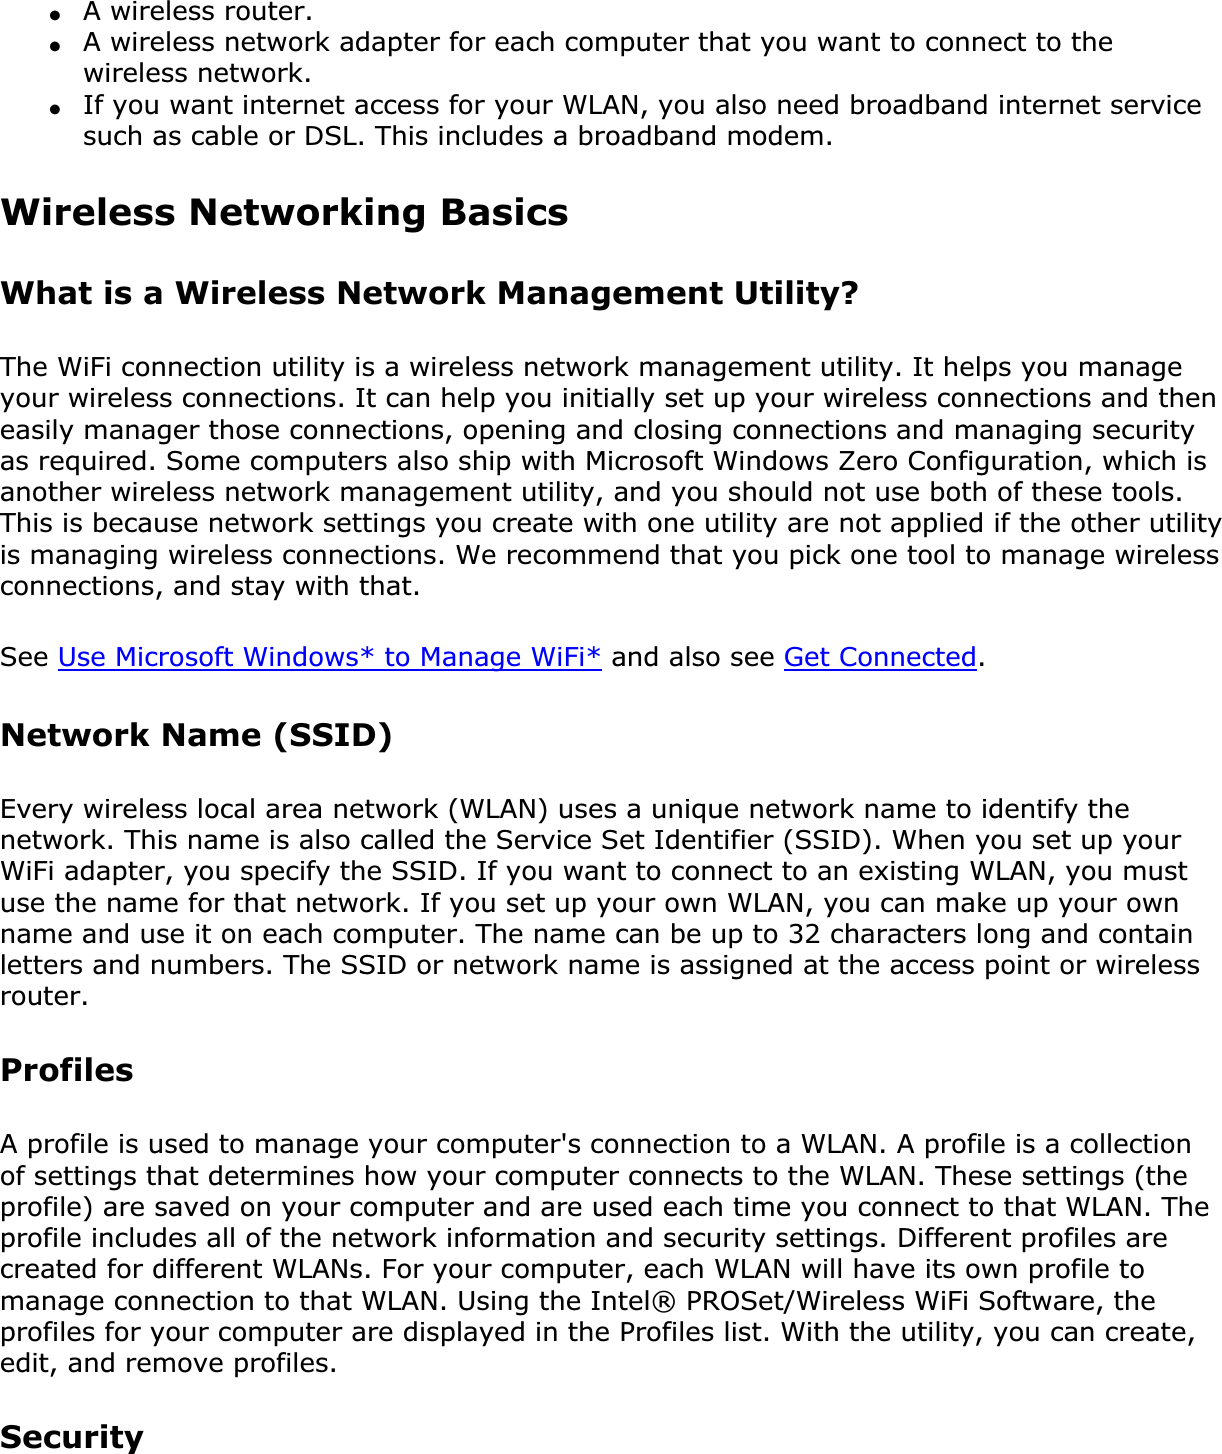 ●A wireless router.●A wireless network adapter for each computer that you want to connect to the wireless network.●If you want internet access for your WLAN, you also need broadband internet service such as cable or DSL. This includes a broadband modem.Wireless Networking Basics What is a Wireless Network Management Utility?The WiFi connection utility is a wireless network management utility. It helps you manage your wireless connections. It can help you initially set up your wireless connections and then easily manager those connections, opening and closing connections and managing security as required. Some computers also ship with Microsoft Windows Zero Configuration, which is another wireless network management utility, and you should not use both of these tools. This is because network settings you create with one utility are not applied if the other utility is managing wireless connections. We recommend that you pick one tool to manage wireless connections, and stay with that.See Use Microsoft Windows* to Manage WiFi* and also see Get Connected.Network Name (SSID) Every wireless local area network (WLAN) uses a unique network name to identify the network. This name is also called the Service Set Identifier (SSID). When you set up your WiFi adapter, you specify the SSID. If you want to connect to an existing WLAN, you must use the name for that network. If you set up your own WLAN, you can make up your own name and use it on each computer. The name can be up to 32 characters long and contain letters and numbers. The SSID or network name is assigned at the access point or wireless router.ProfilesA profile is used to manage your computer&apos;s connection to a WLAN. A profile is a collection of settings that determines how your computer connects to the WLAN. These settings (the profile) are saved on your computer and are used each time you connect to that WLAN. The profile includes all of the network information and security settings. Different profiles are created for different WLANs. For your computer, each WLAN will have its own profile to manage connection to that WLAN. Using the Intel® PROSet/Wireless WiFi Software, the profiles for your computer are displayed in the Profiles list. With the utility, you can create, edit, and remove profiles.Security